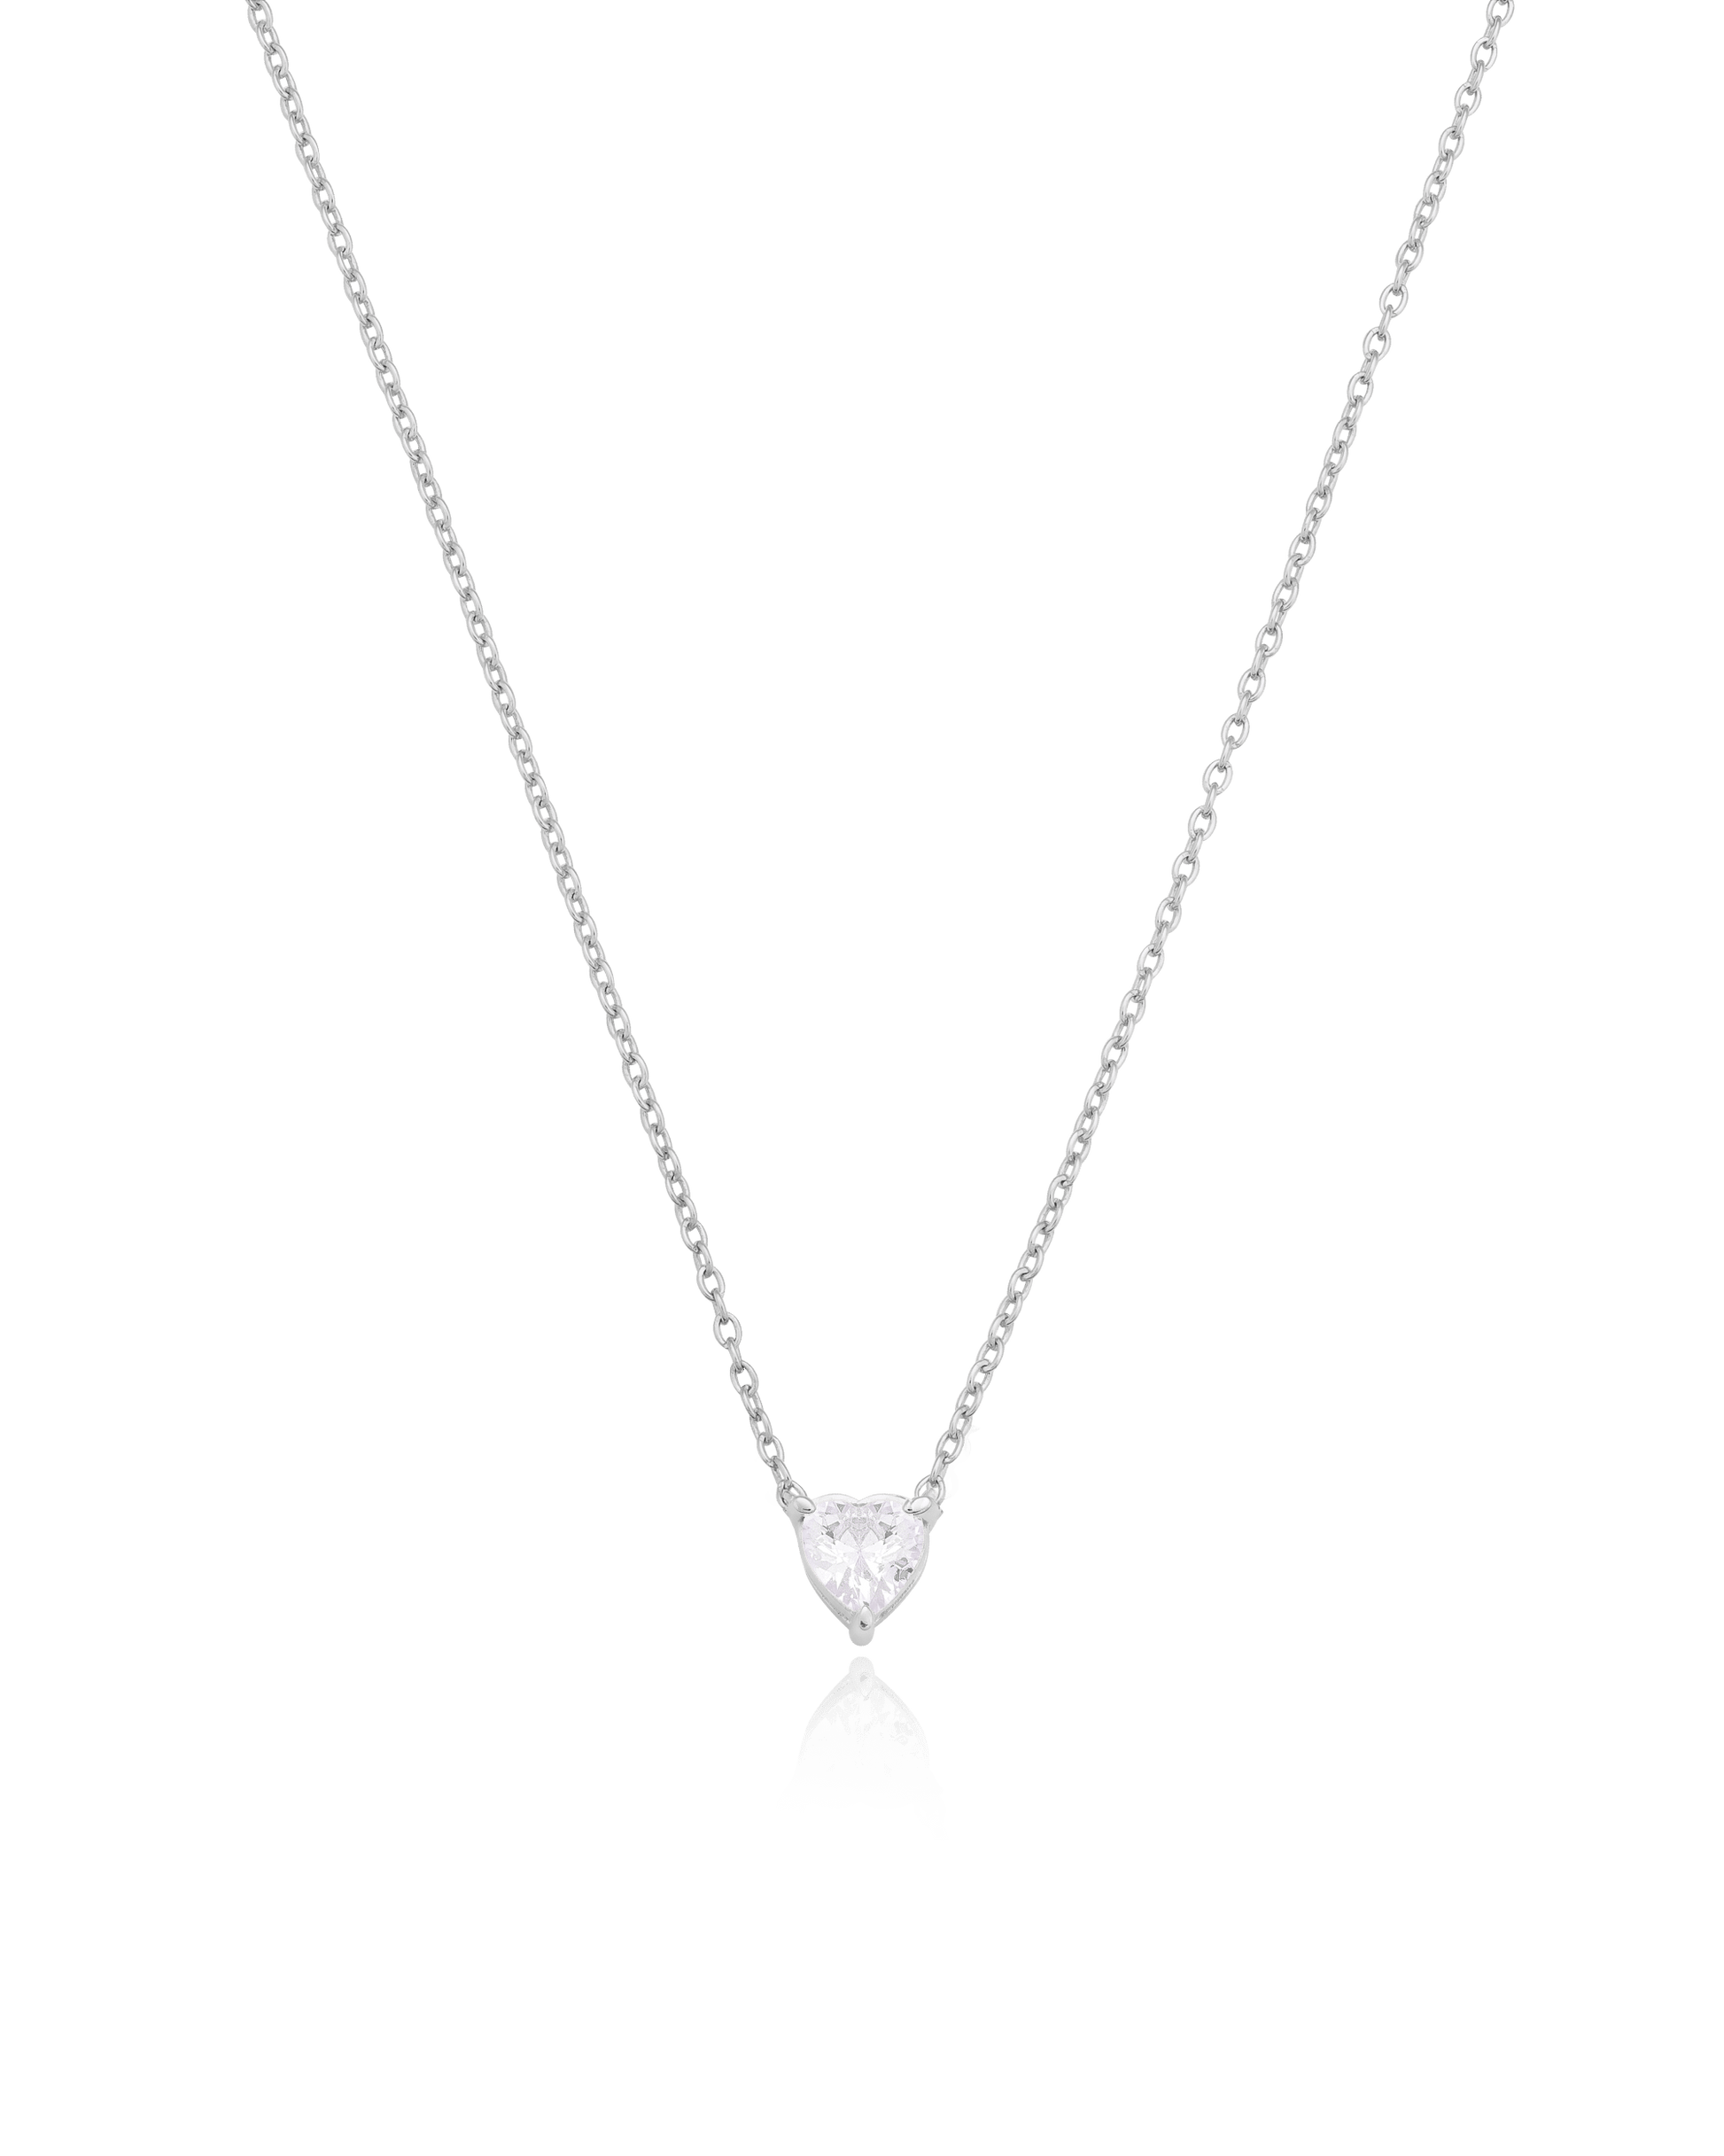 Heart Solitaire Diamond Necklace - 925 Sterling Silver Necklaces magal-dev 